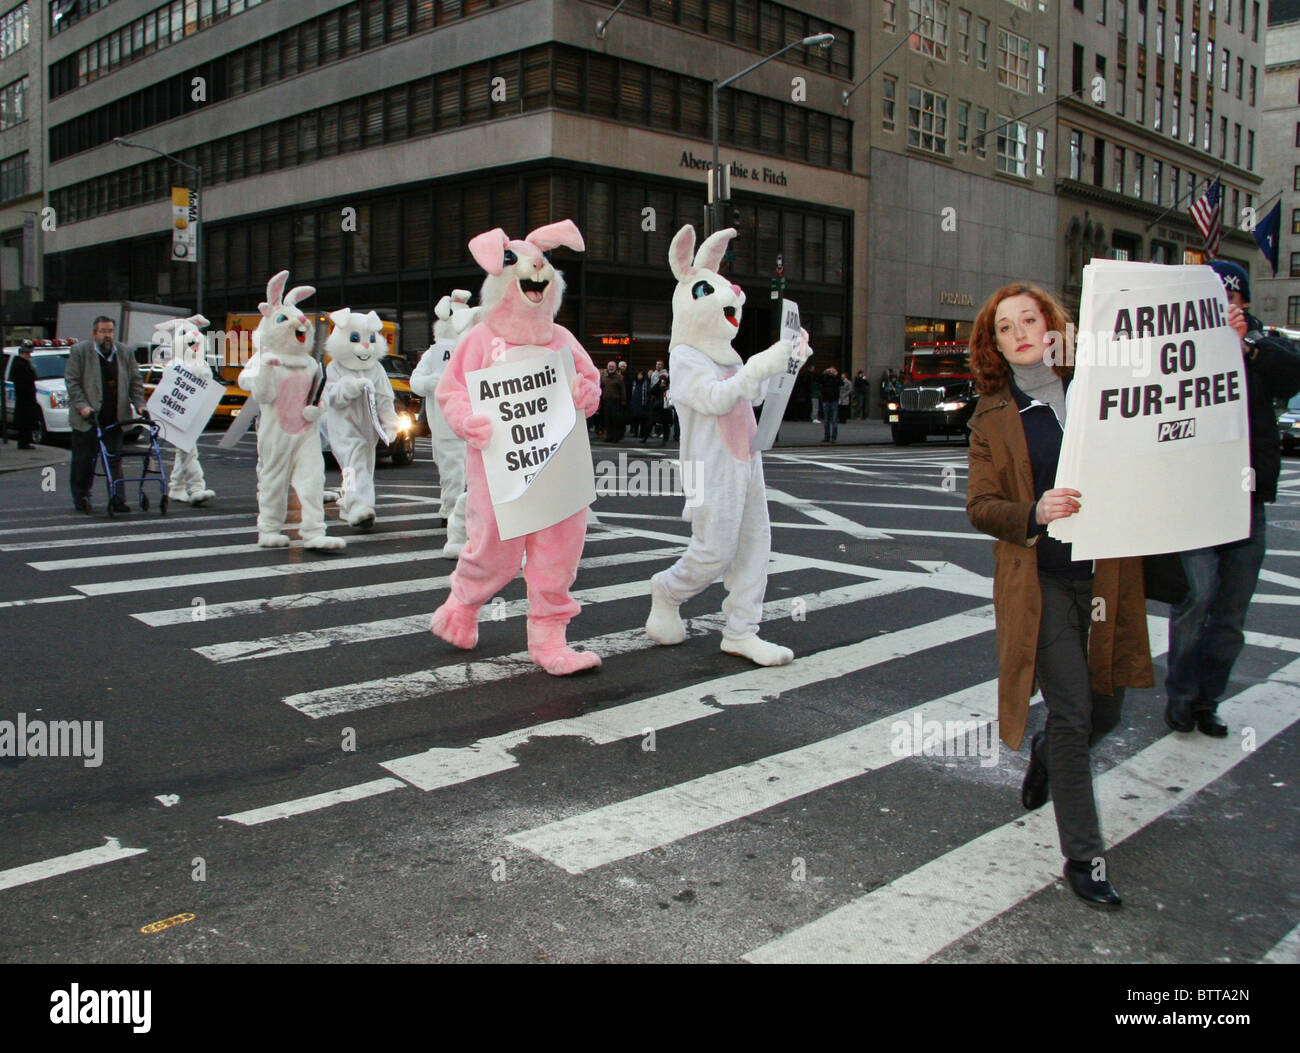 PETA Protests Use of Rabbit Fur at Armani Fifth Avenue Store Opening Stock Photo